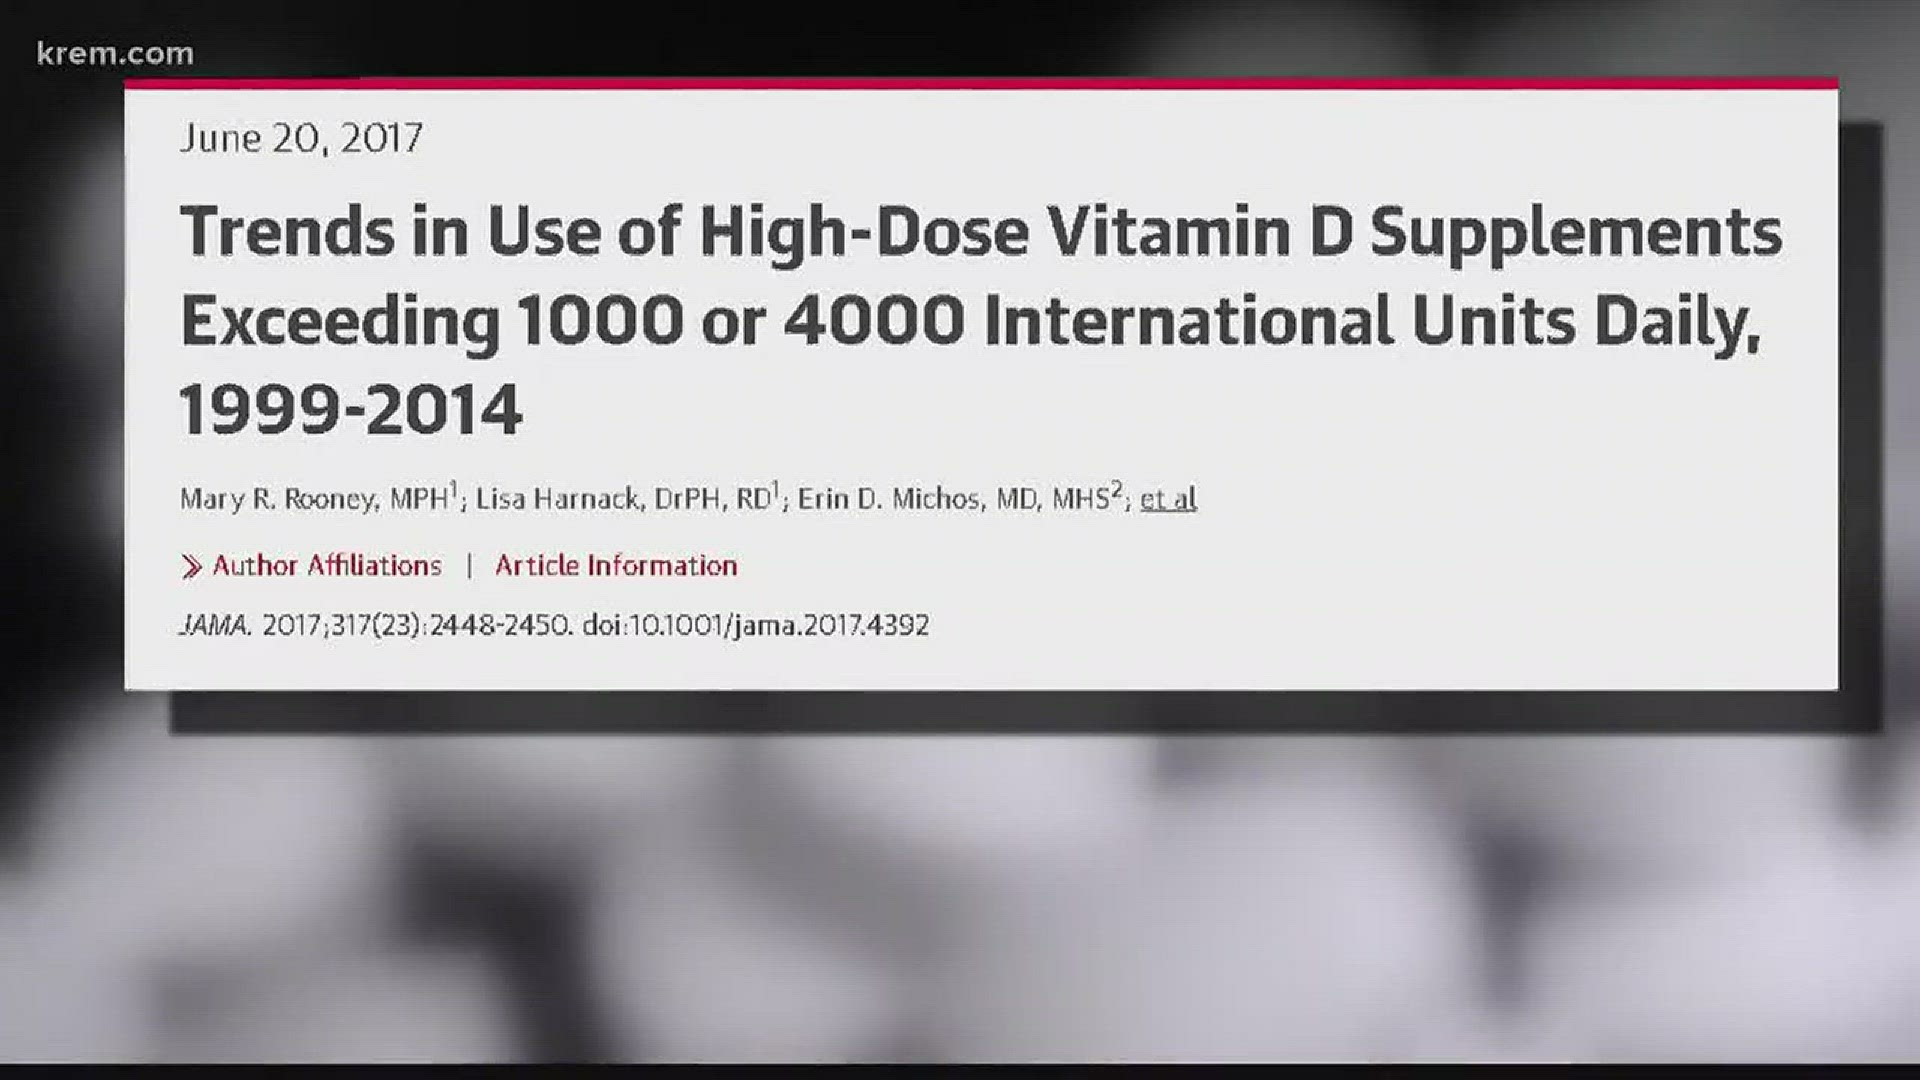 Doctors who study vitamin D at Brigham and Women's Hospital said even though some research shows an association between low blood levels of vitamin D and different diseases, it has not been proven vitamin D deficiency will actually cause disease.